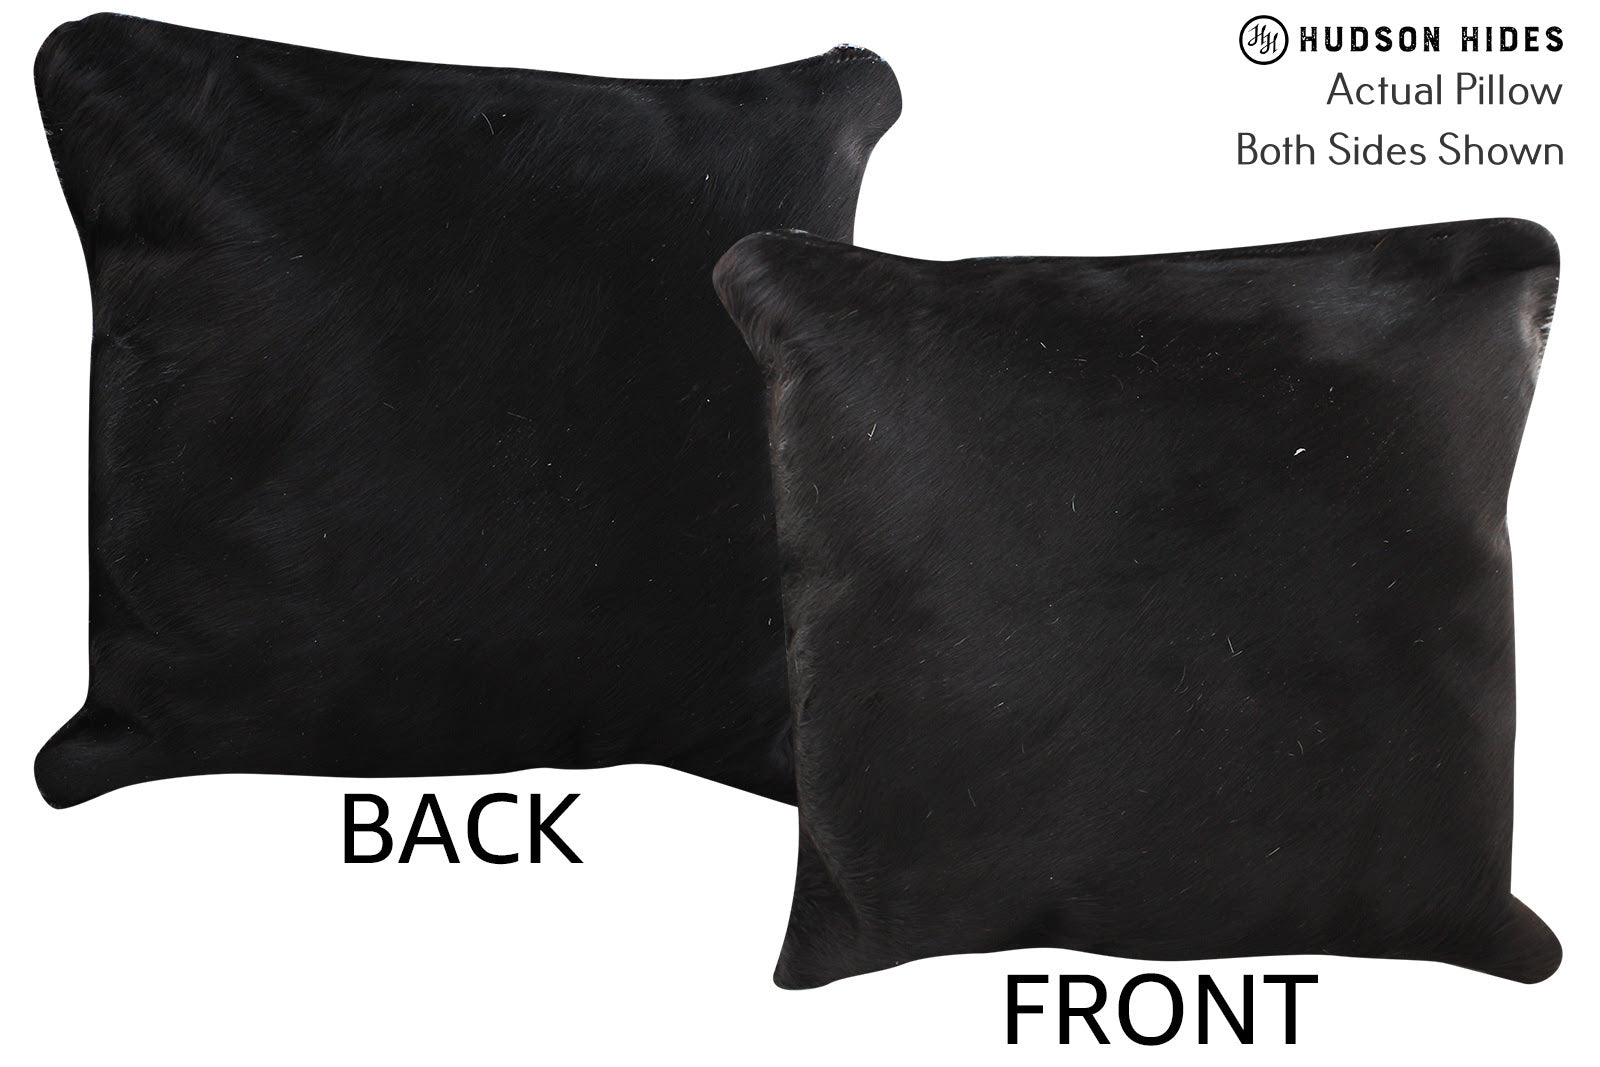 Solid Black Cowhide Pillow #74953